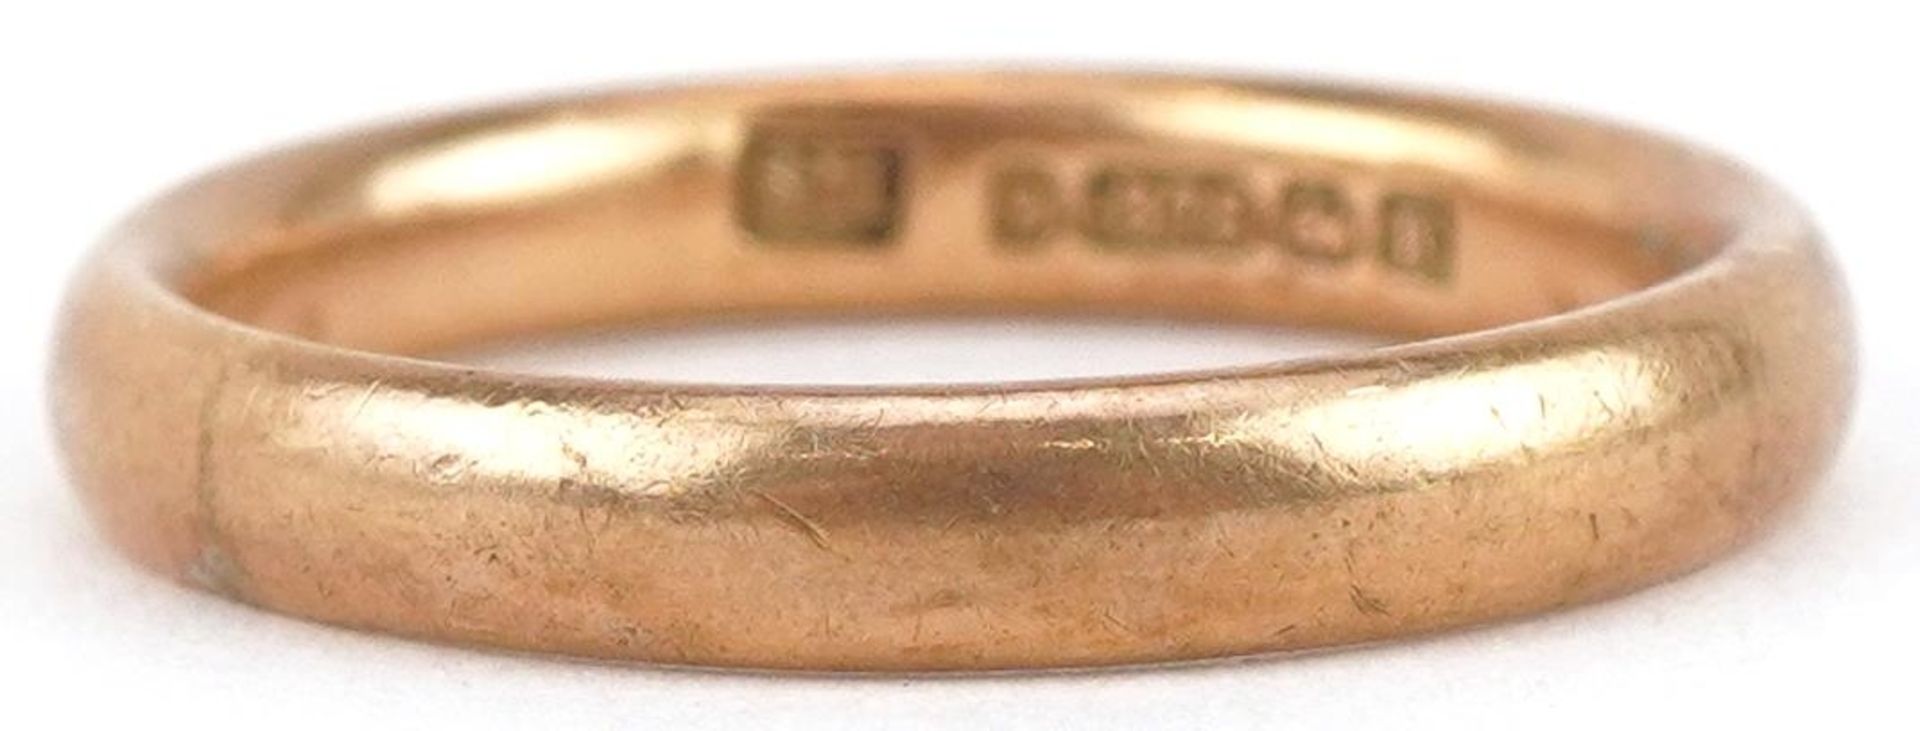 9ct gold wedding band, size M/N, 2.9g : For further information on this lot please visit www.